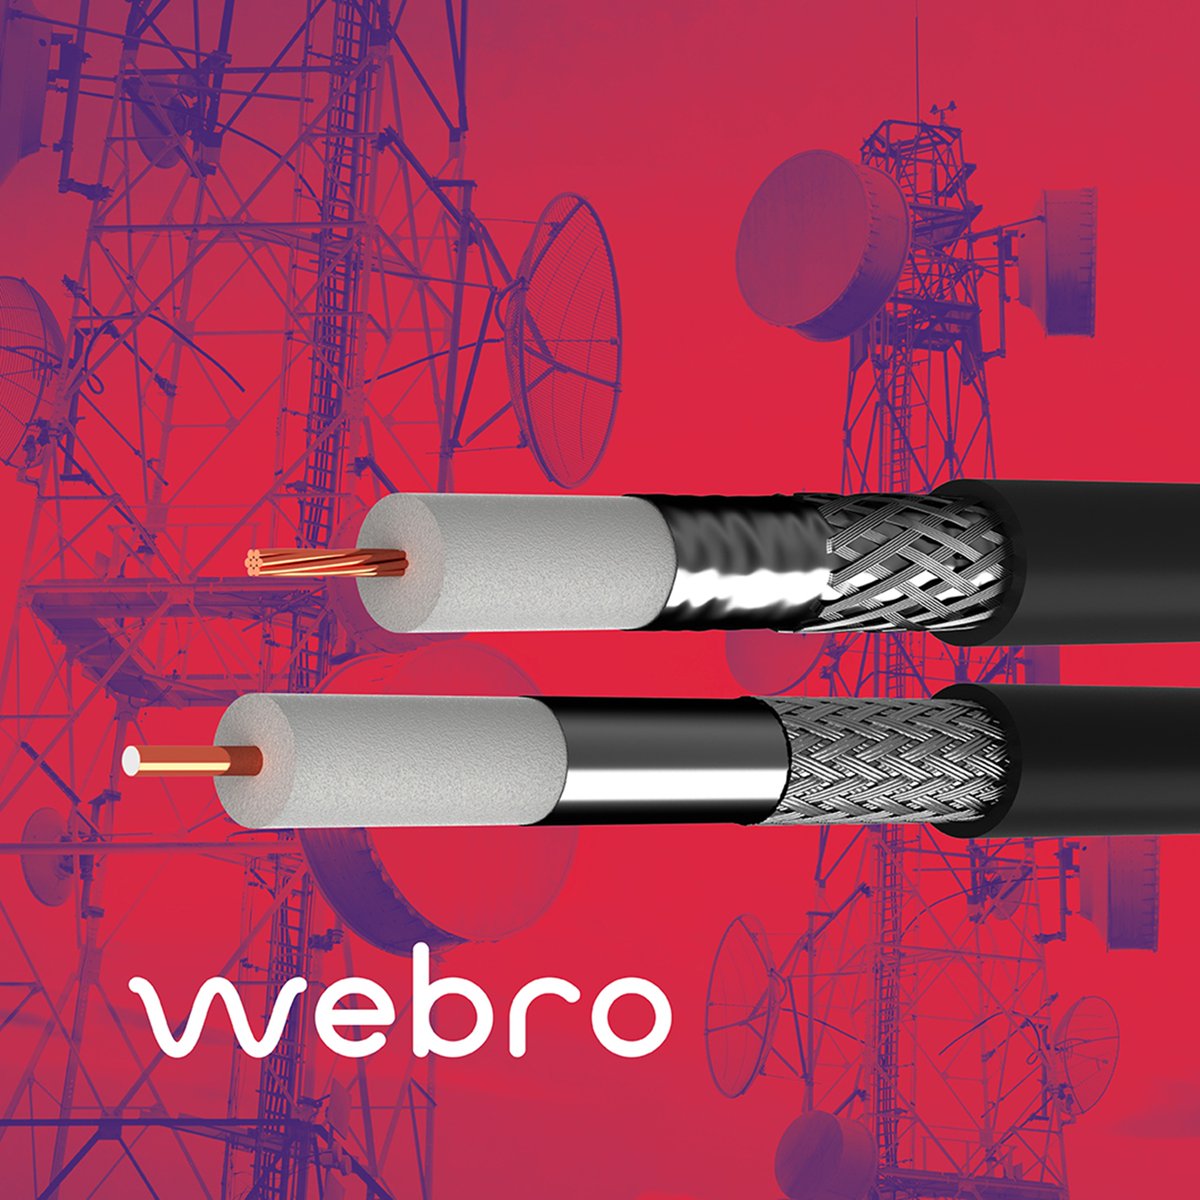 Low Loss coaxial cables are used in a wide range of applications to provide connectivity 'on the go'. Find out more about these versatile cables in our new blog. ow.ly/aQqS50QVL8K